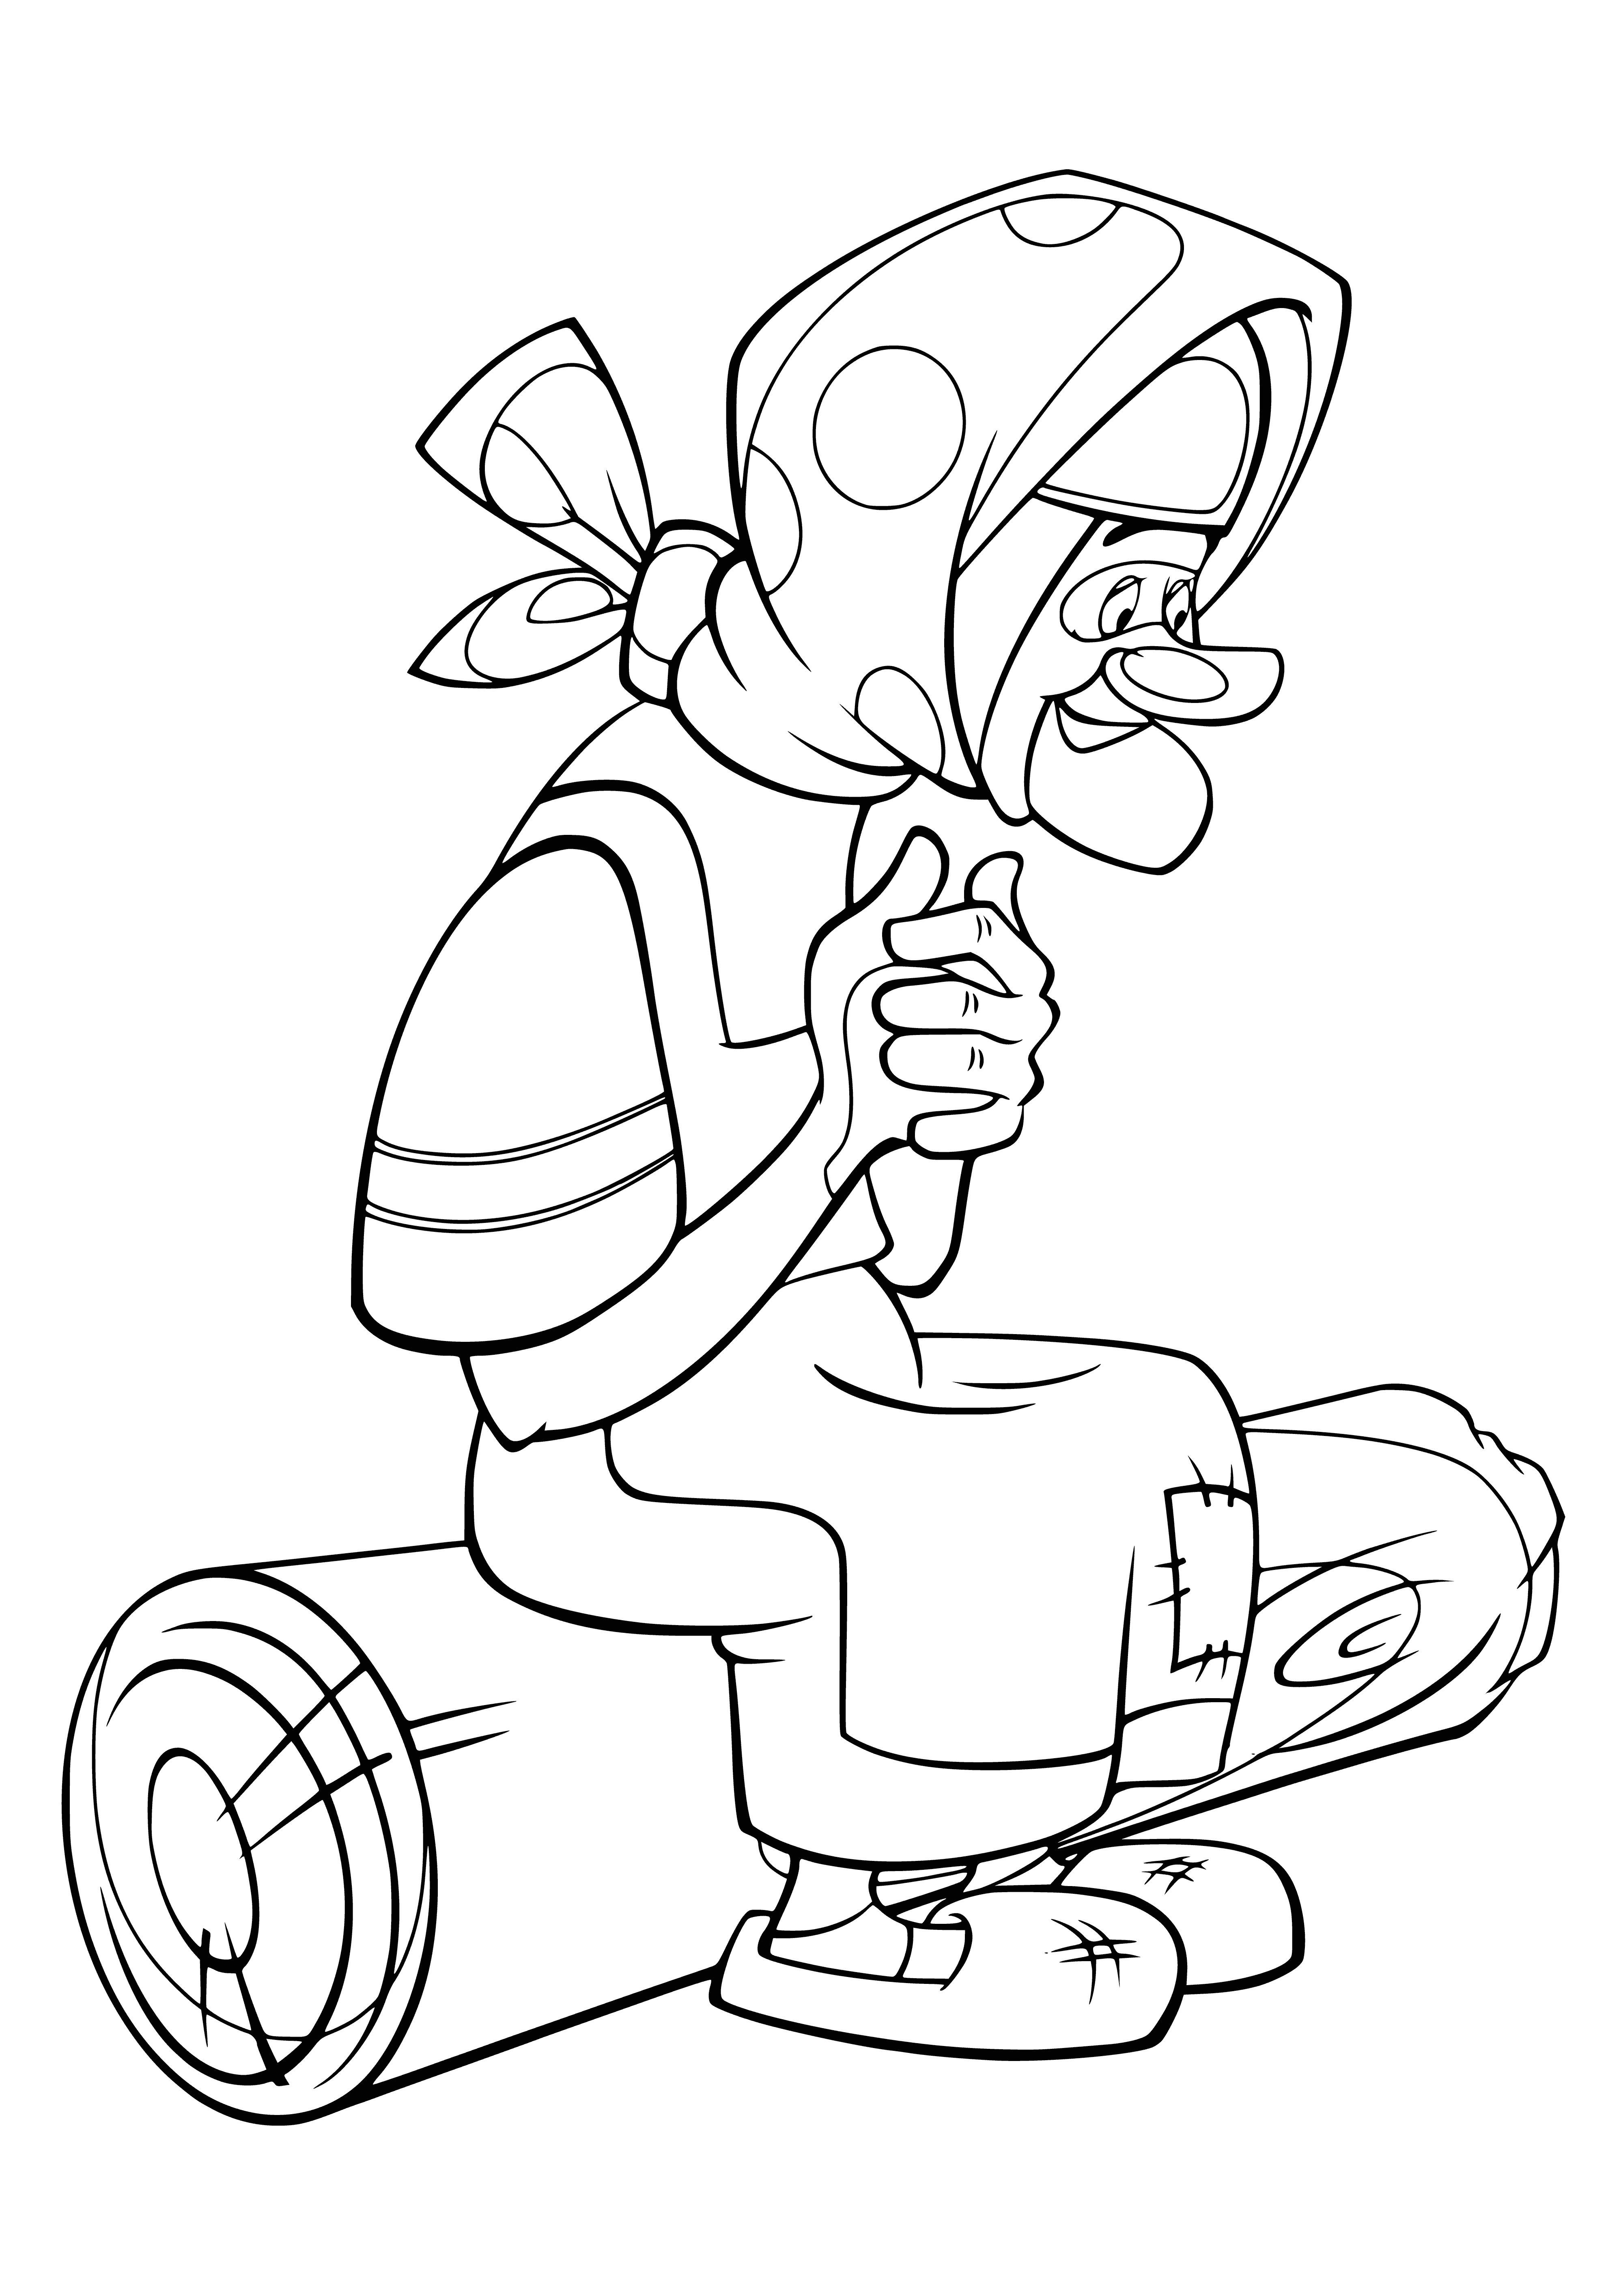 coloring page: Old woman stirs soup in dark room; wearing tattered dress & scarf on head.